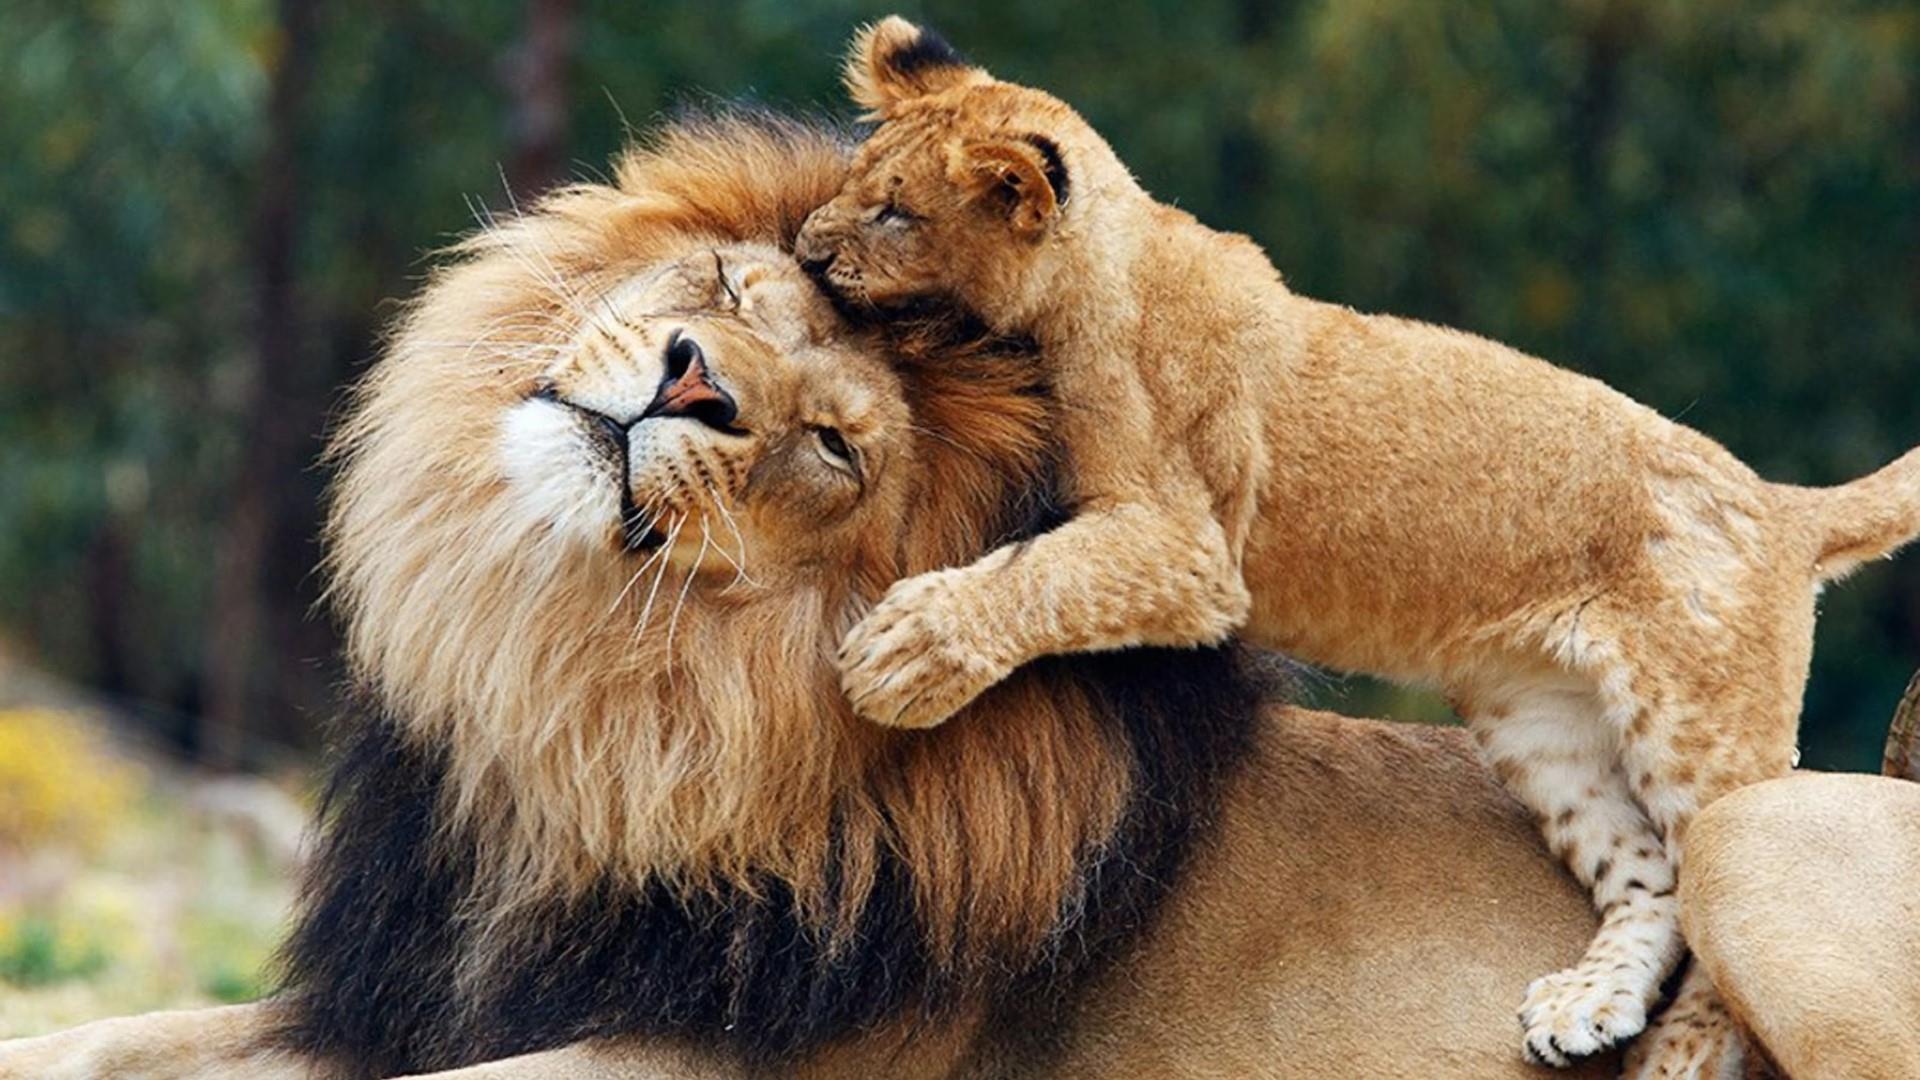 Lion King With Cub Wallpaper - Name Of Lion Baby , HD Wallpaper & Backgrounds